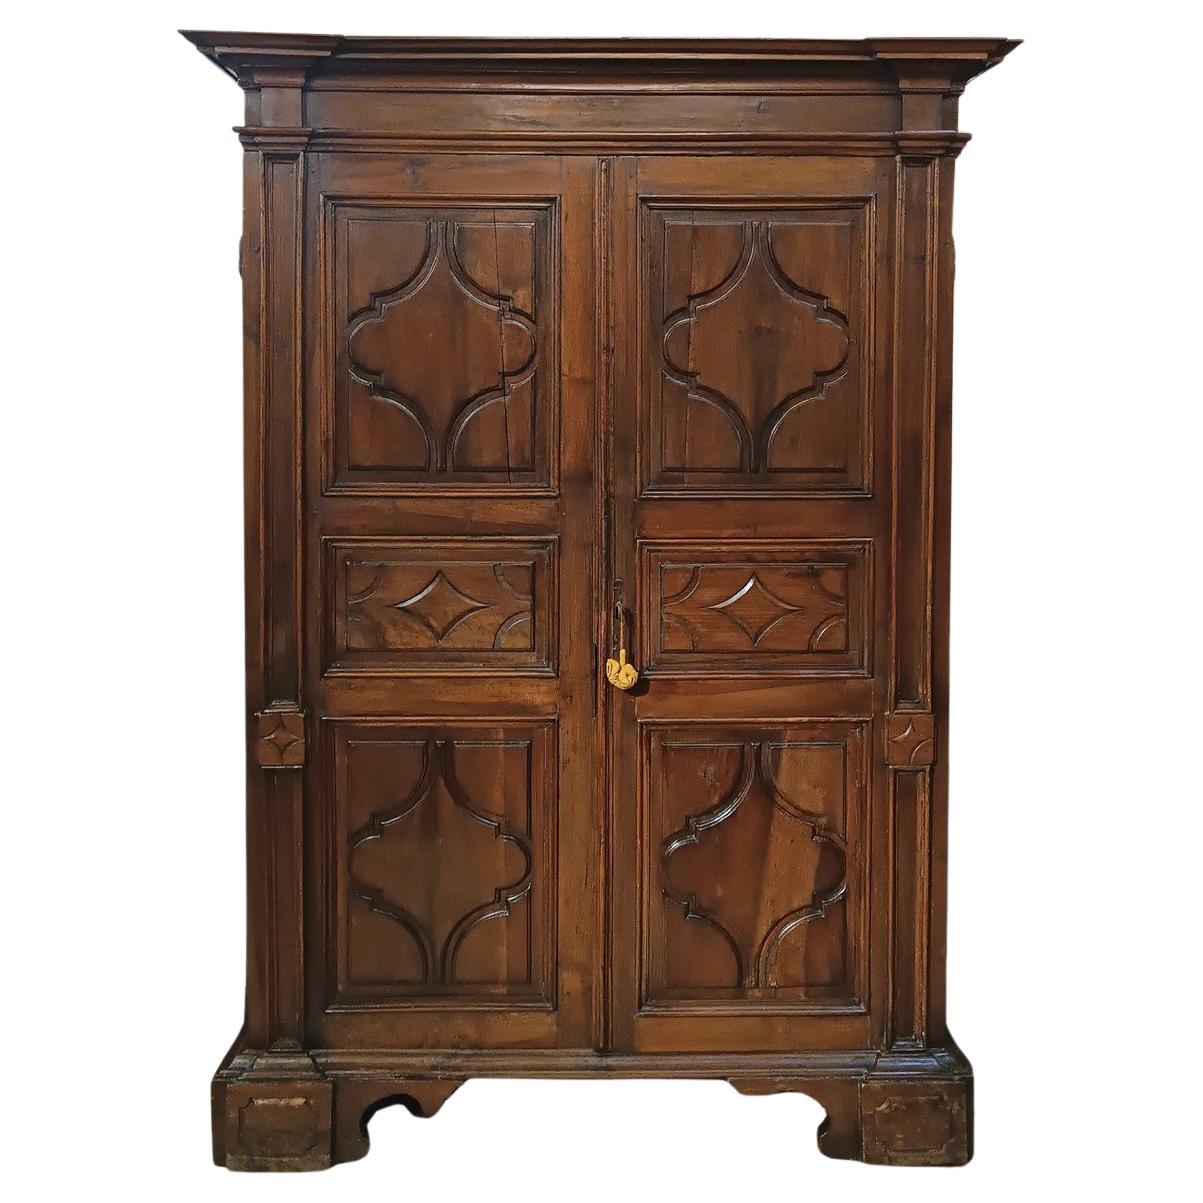 END OF THE 17th CENTURY LOUIS XIV WARDROBE IN SOLID WALNUT For Sale